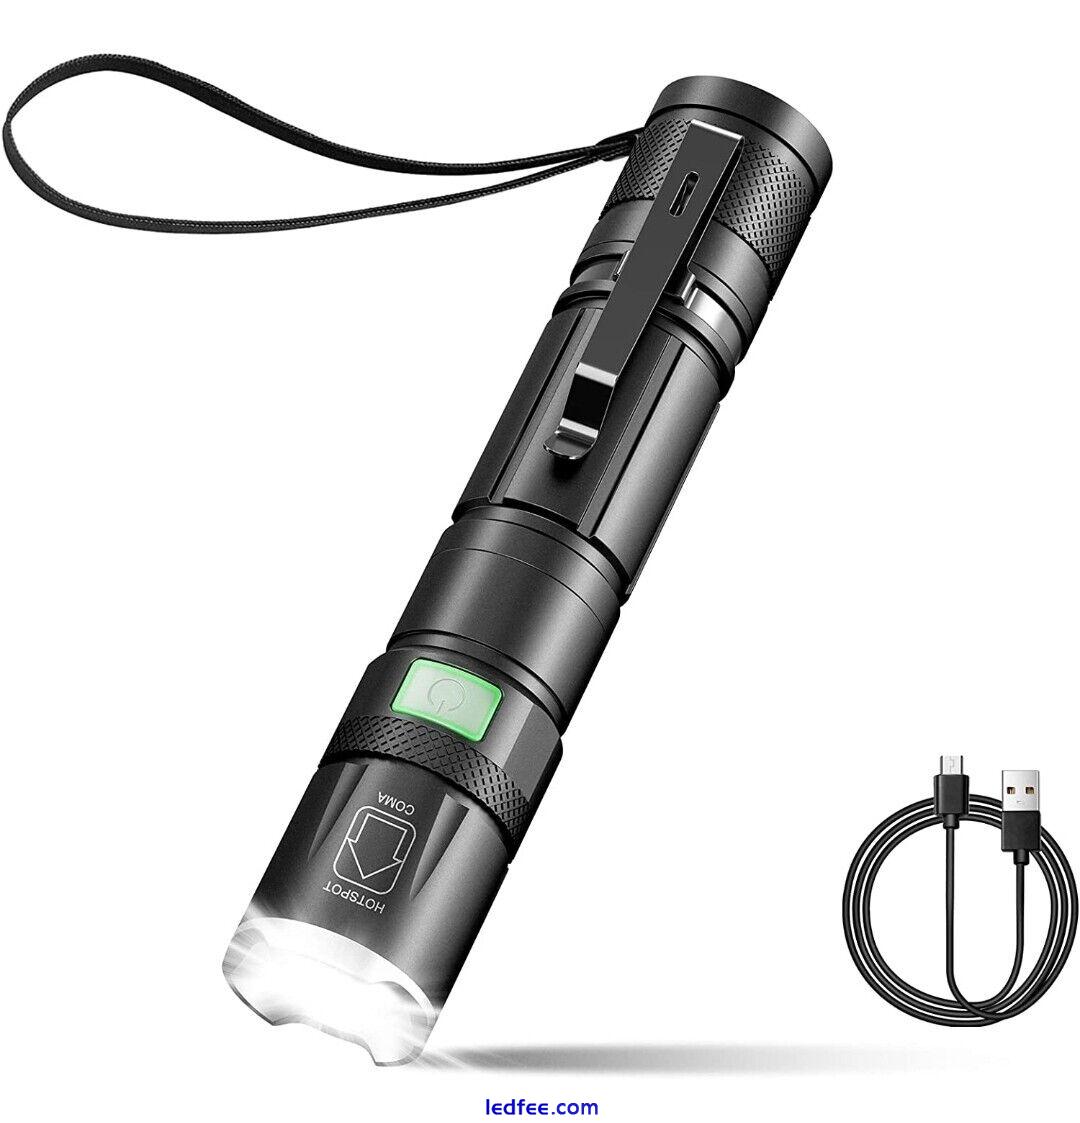 LED Torch 2000 Lumens Rechargeable Super Bright 5 Modes focus Waterproof Pocket 5 